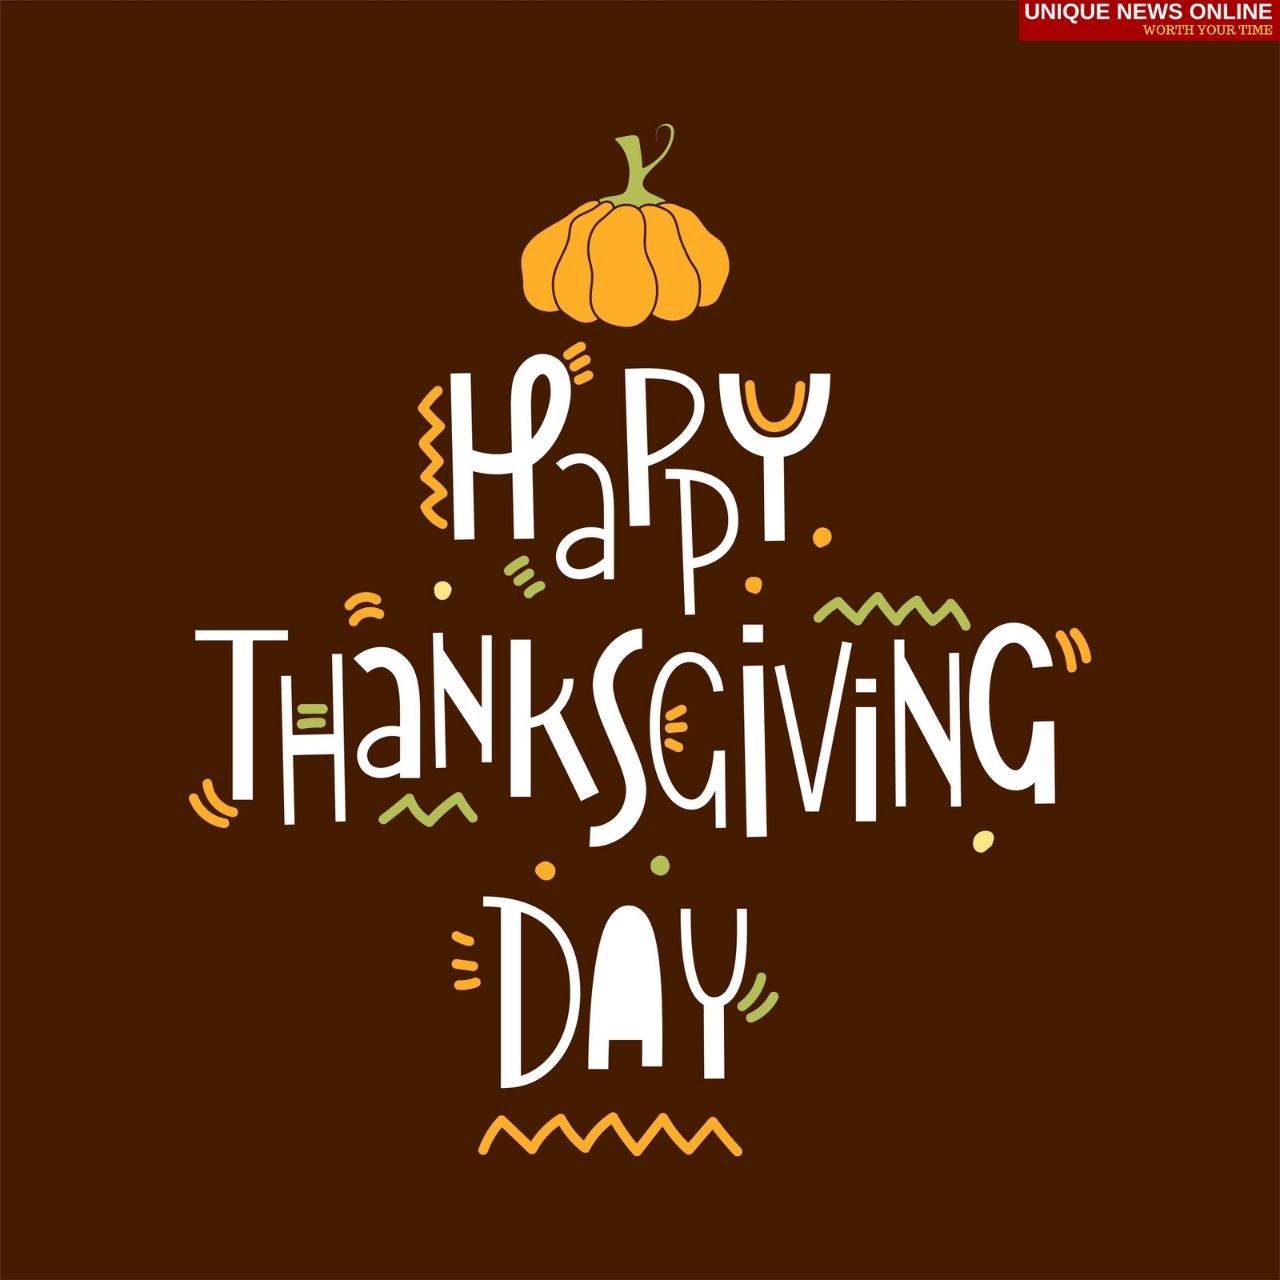 Thanksgiving 2021 Wishes Hd Images Messages Greetings Sayings Captions And Poster To Greet